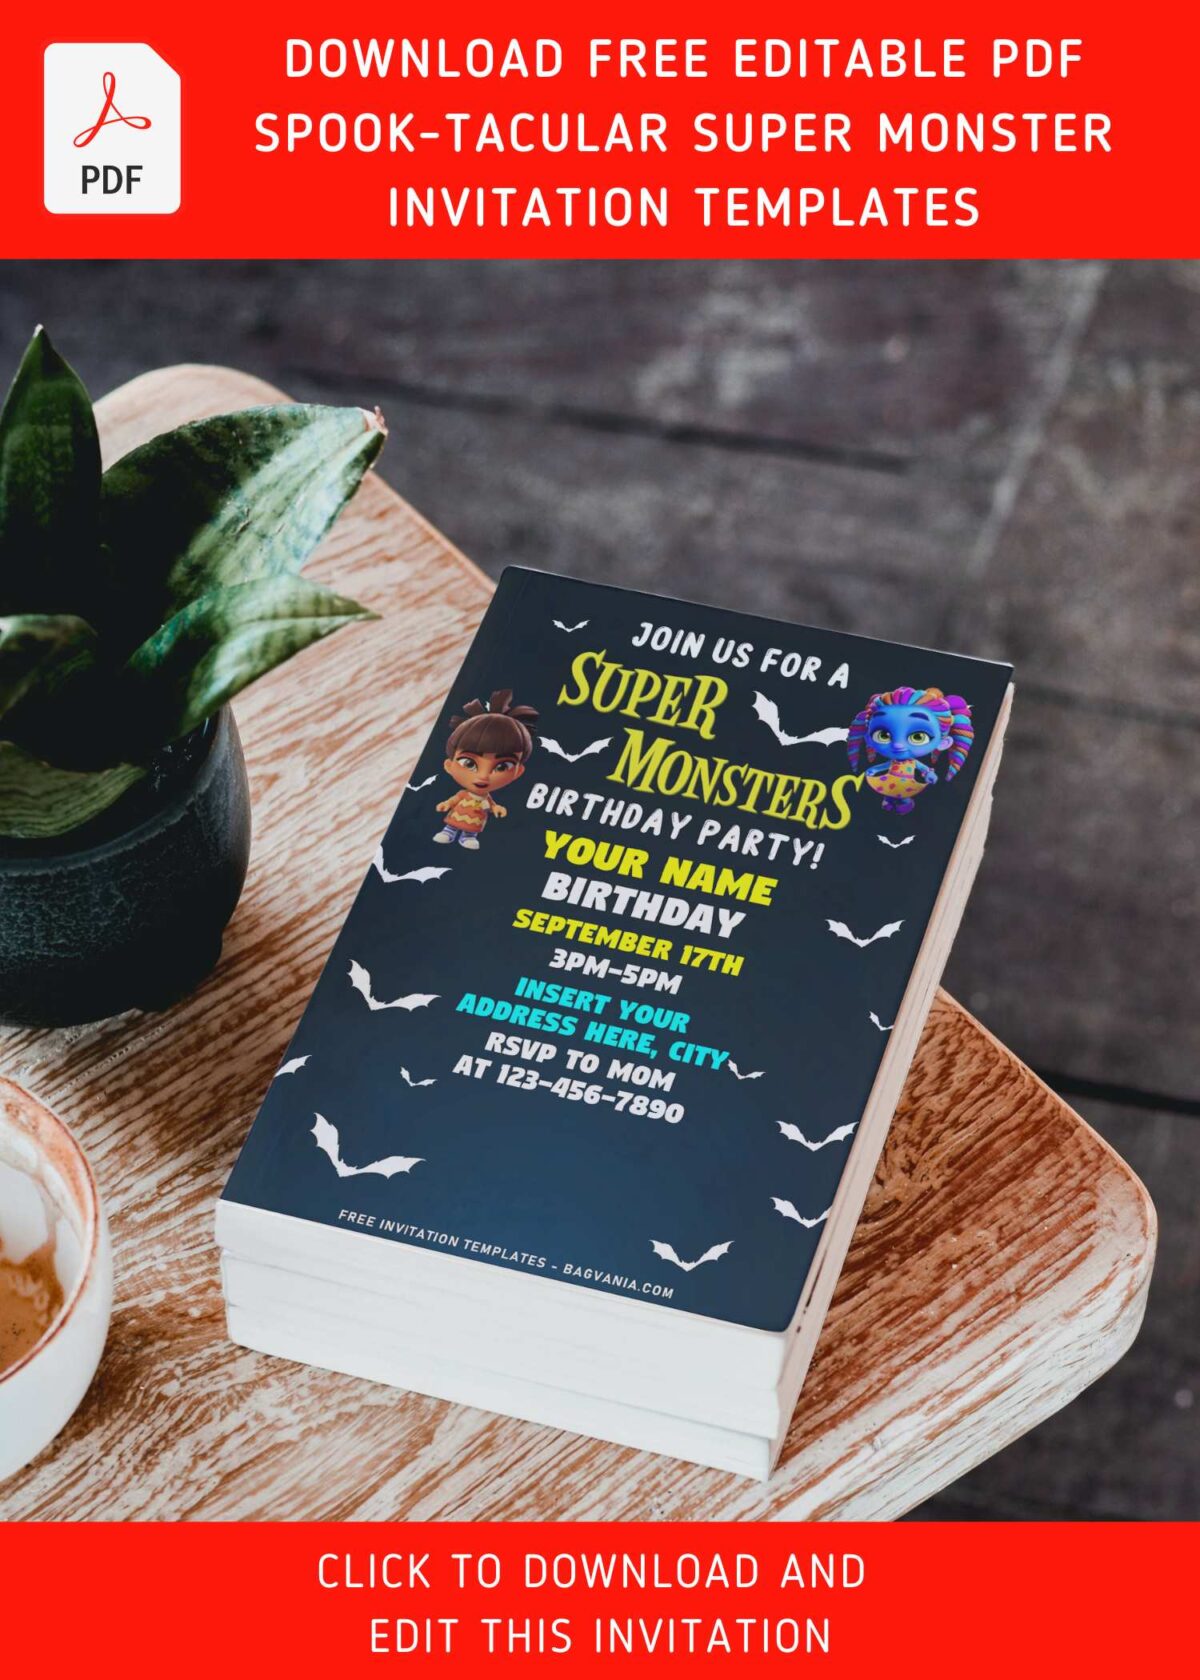 (Free Editable PDF) Spooktacular Super Monster Birthday Invitation Templates with colorful text